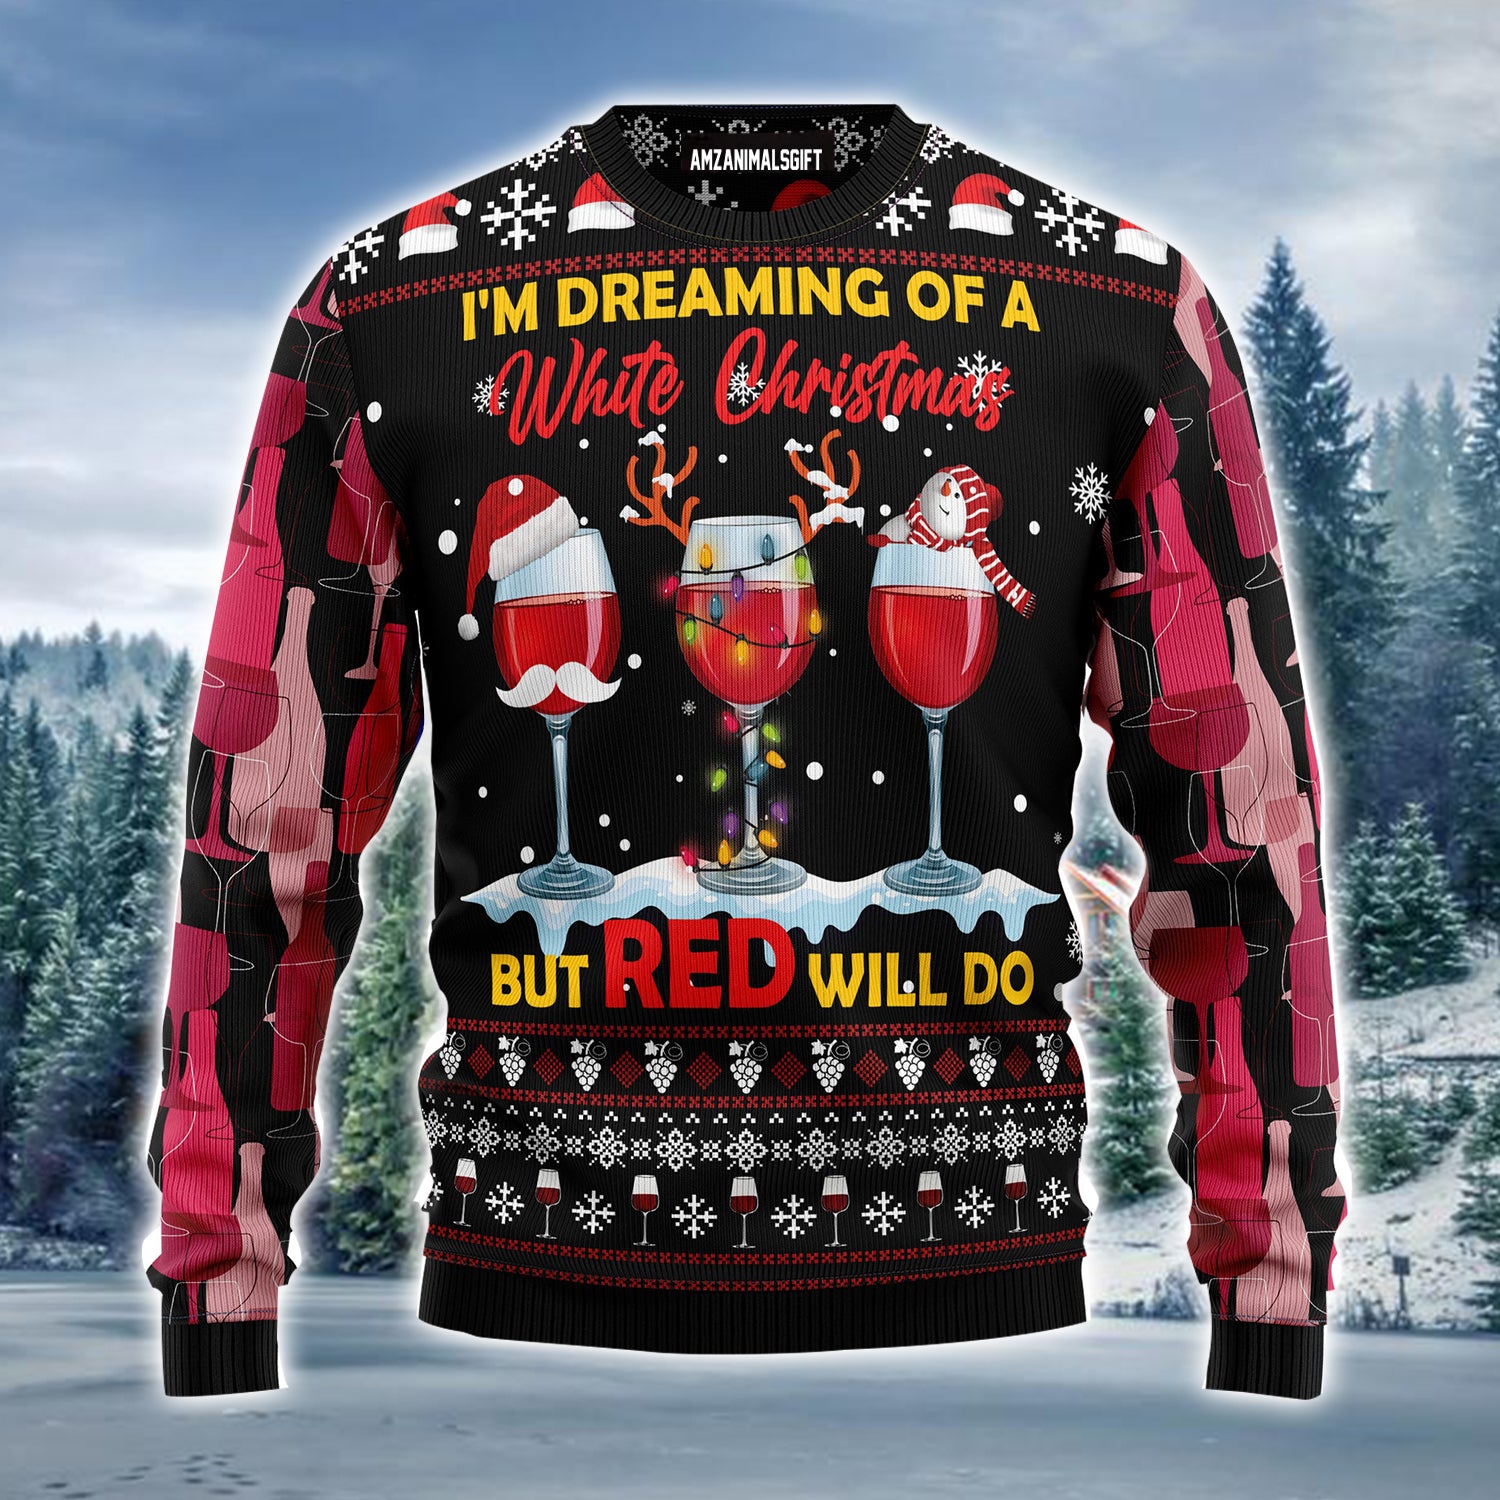 Red Wine Christmas Ugly Christmas Sweater, I'm Dreaming Of A White Christmas Ugly Sweater For Men & Women - Best Gift For Christmas, Friends, Family